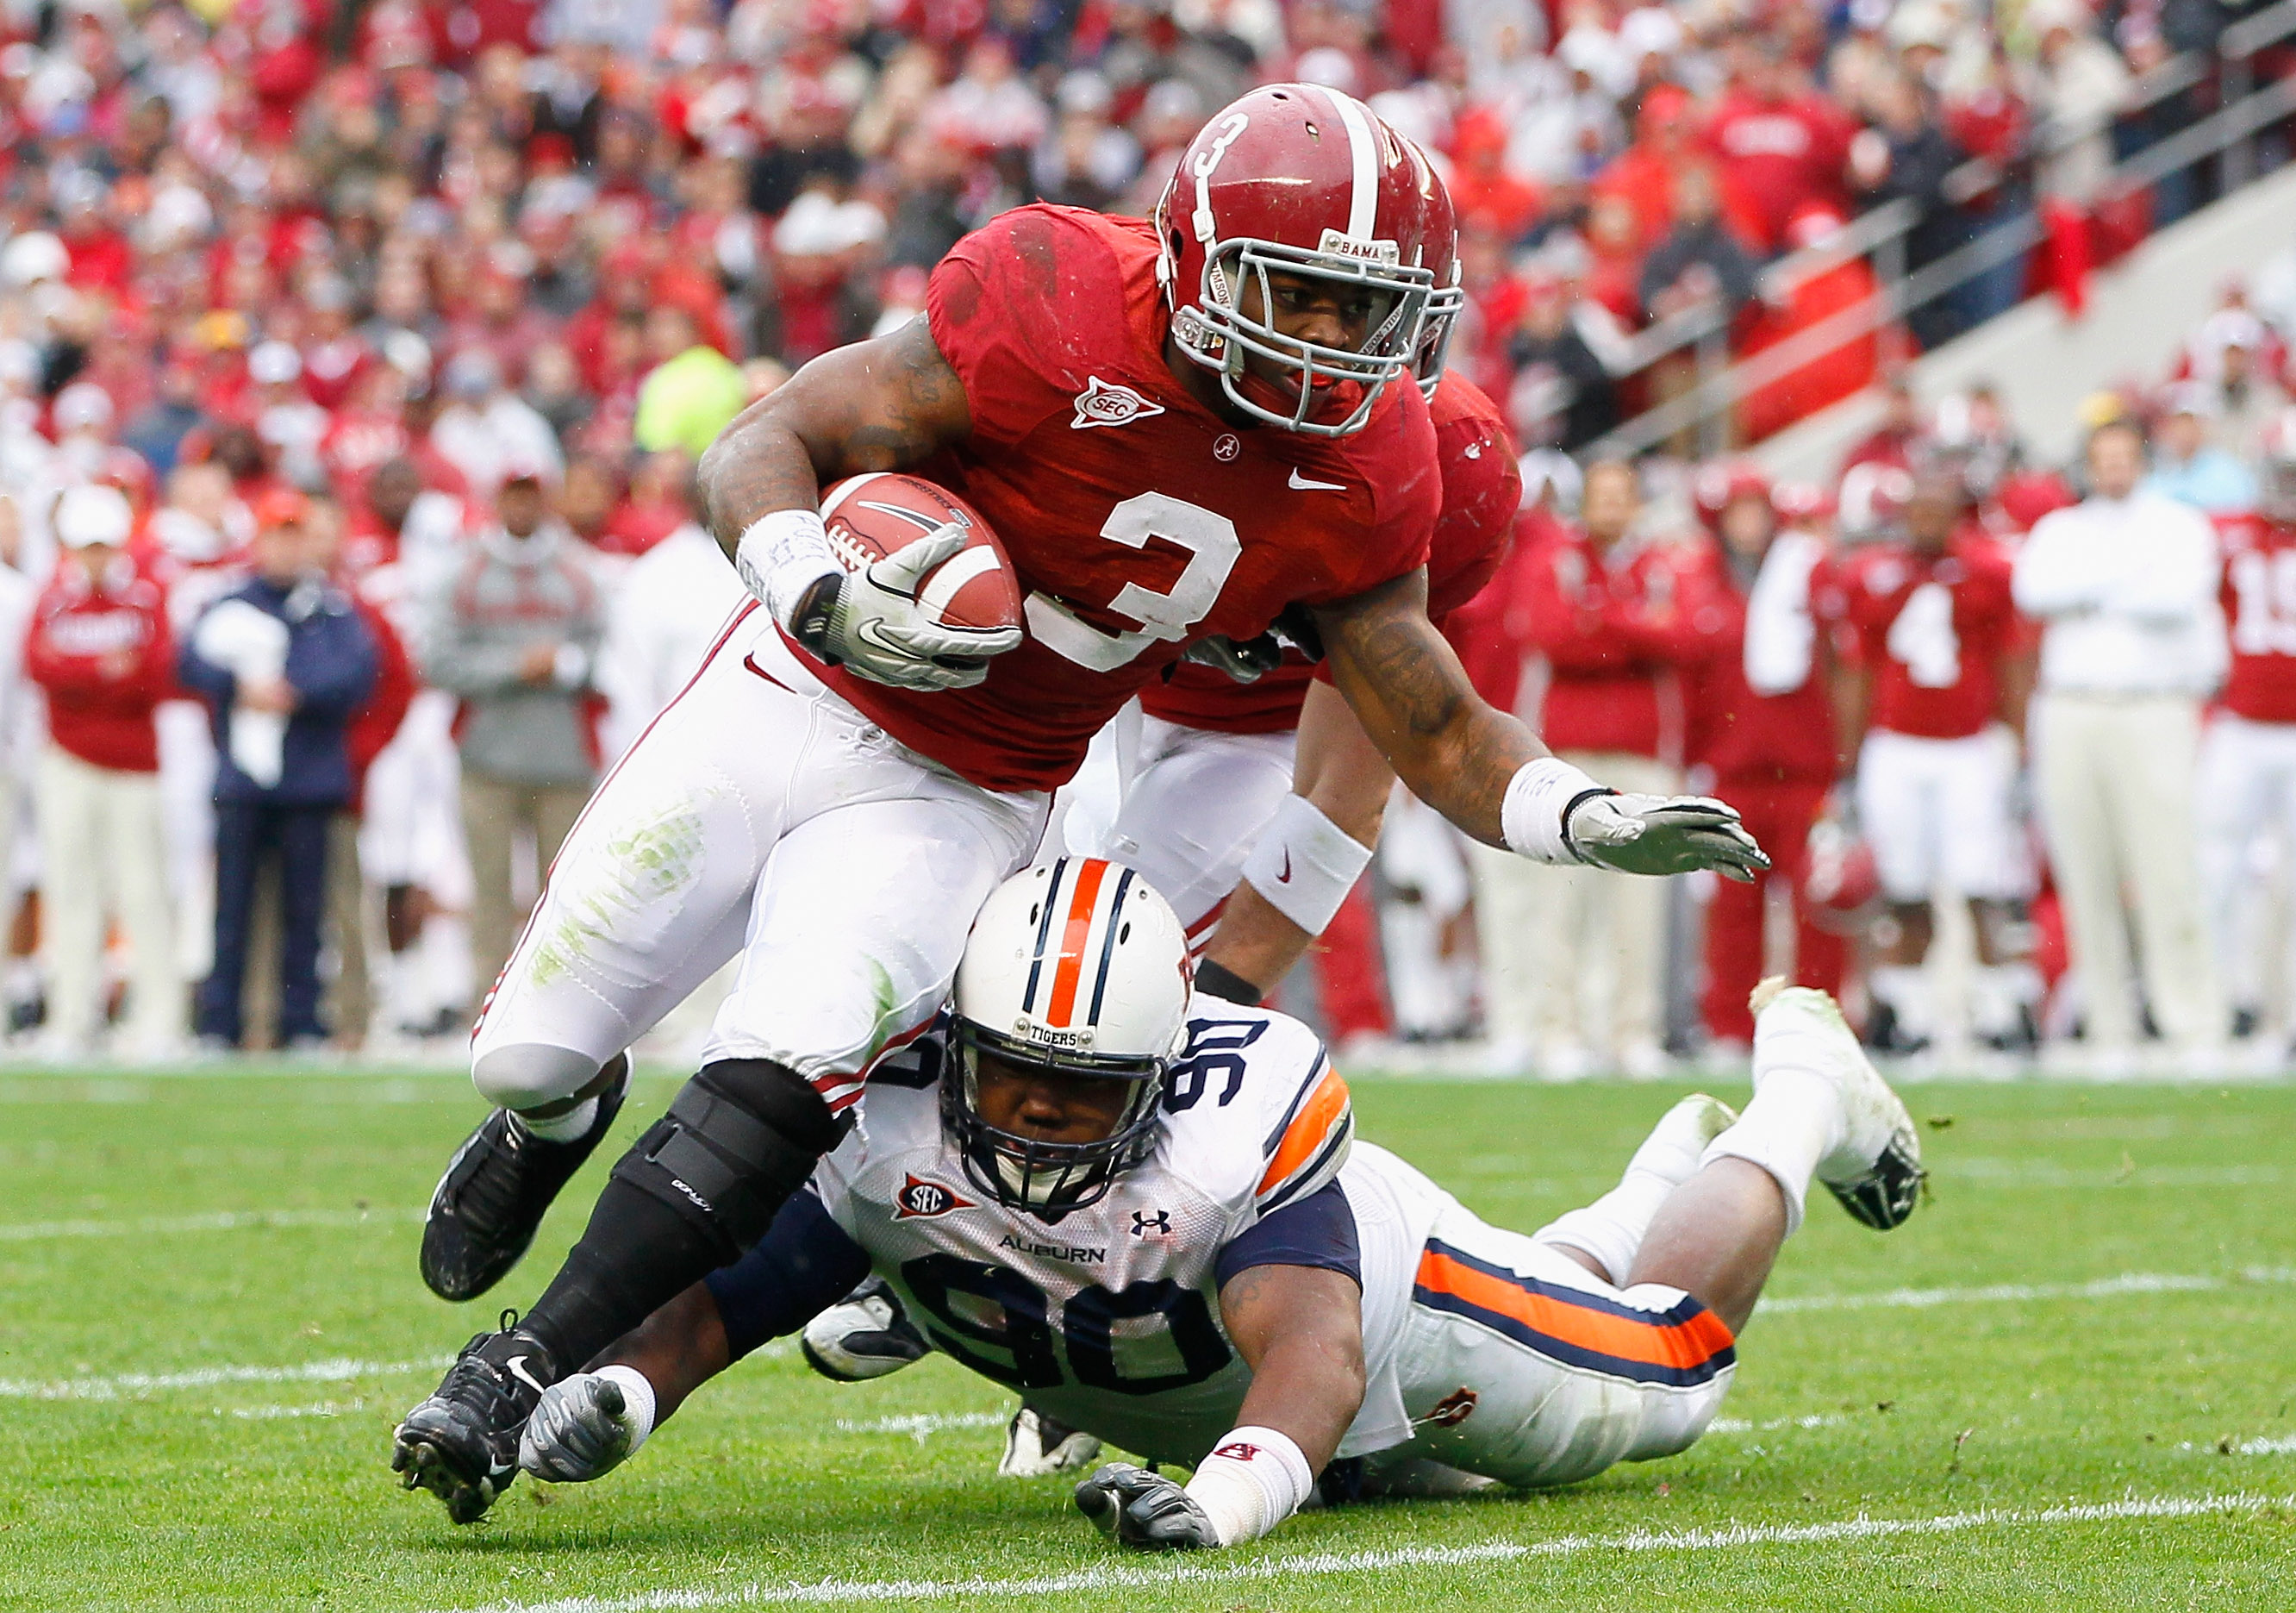 TUSCALOOSA, AL - NOVEMBER 26:  Trent Richardson #3 of the Alabama Crimson Tide is tackled by Nick Fairly #90 of the Auburn Tigers at Bryant-Denny Stadium on November 26, 2010 in Tuscaloosa, Alabama.  (Photo by Kevin C. Cox/Getty Images)